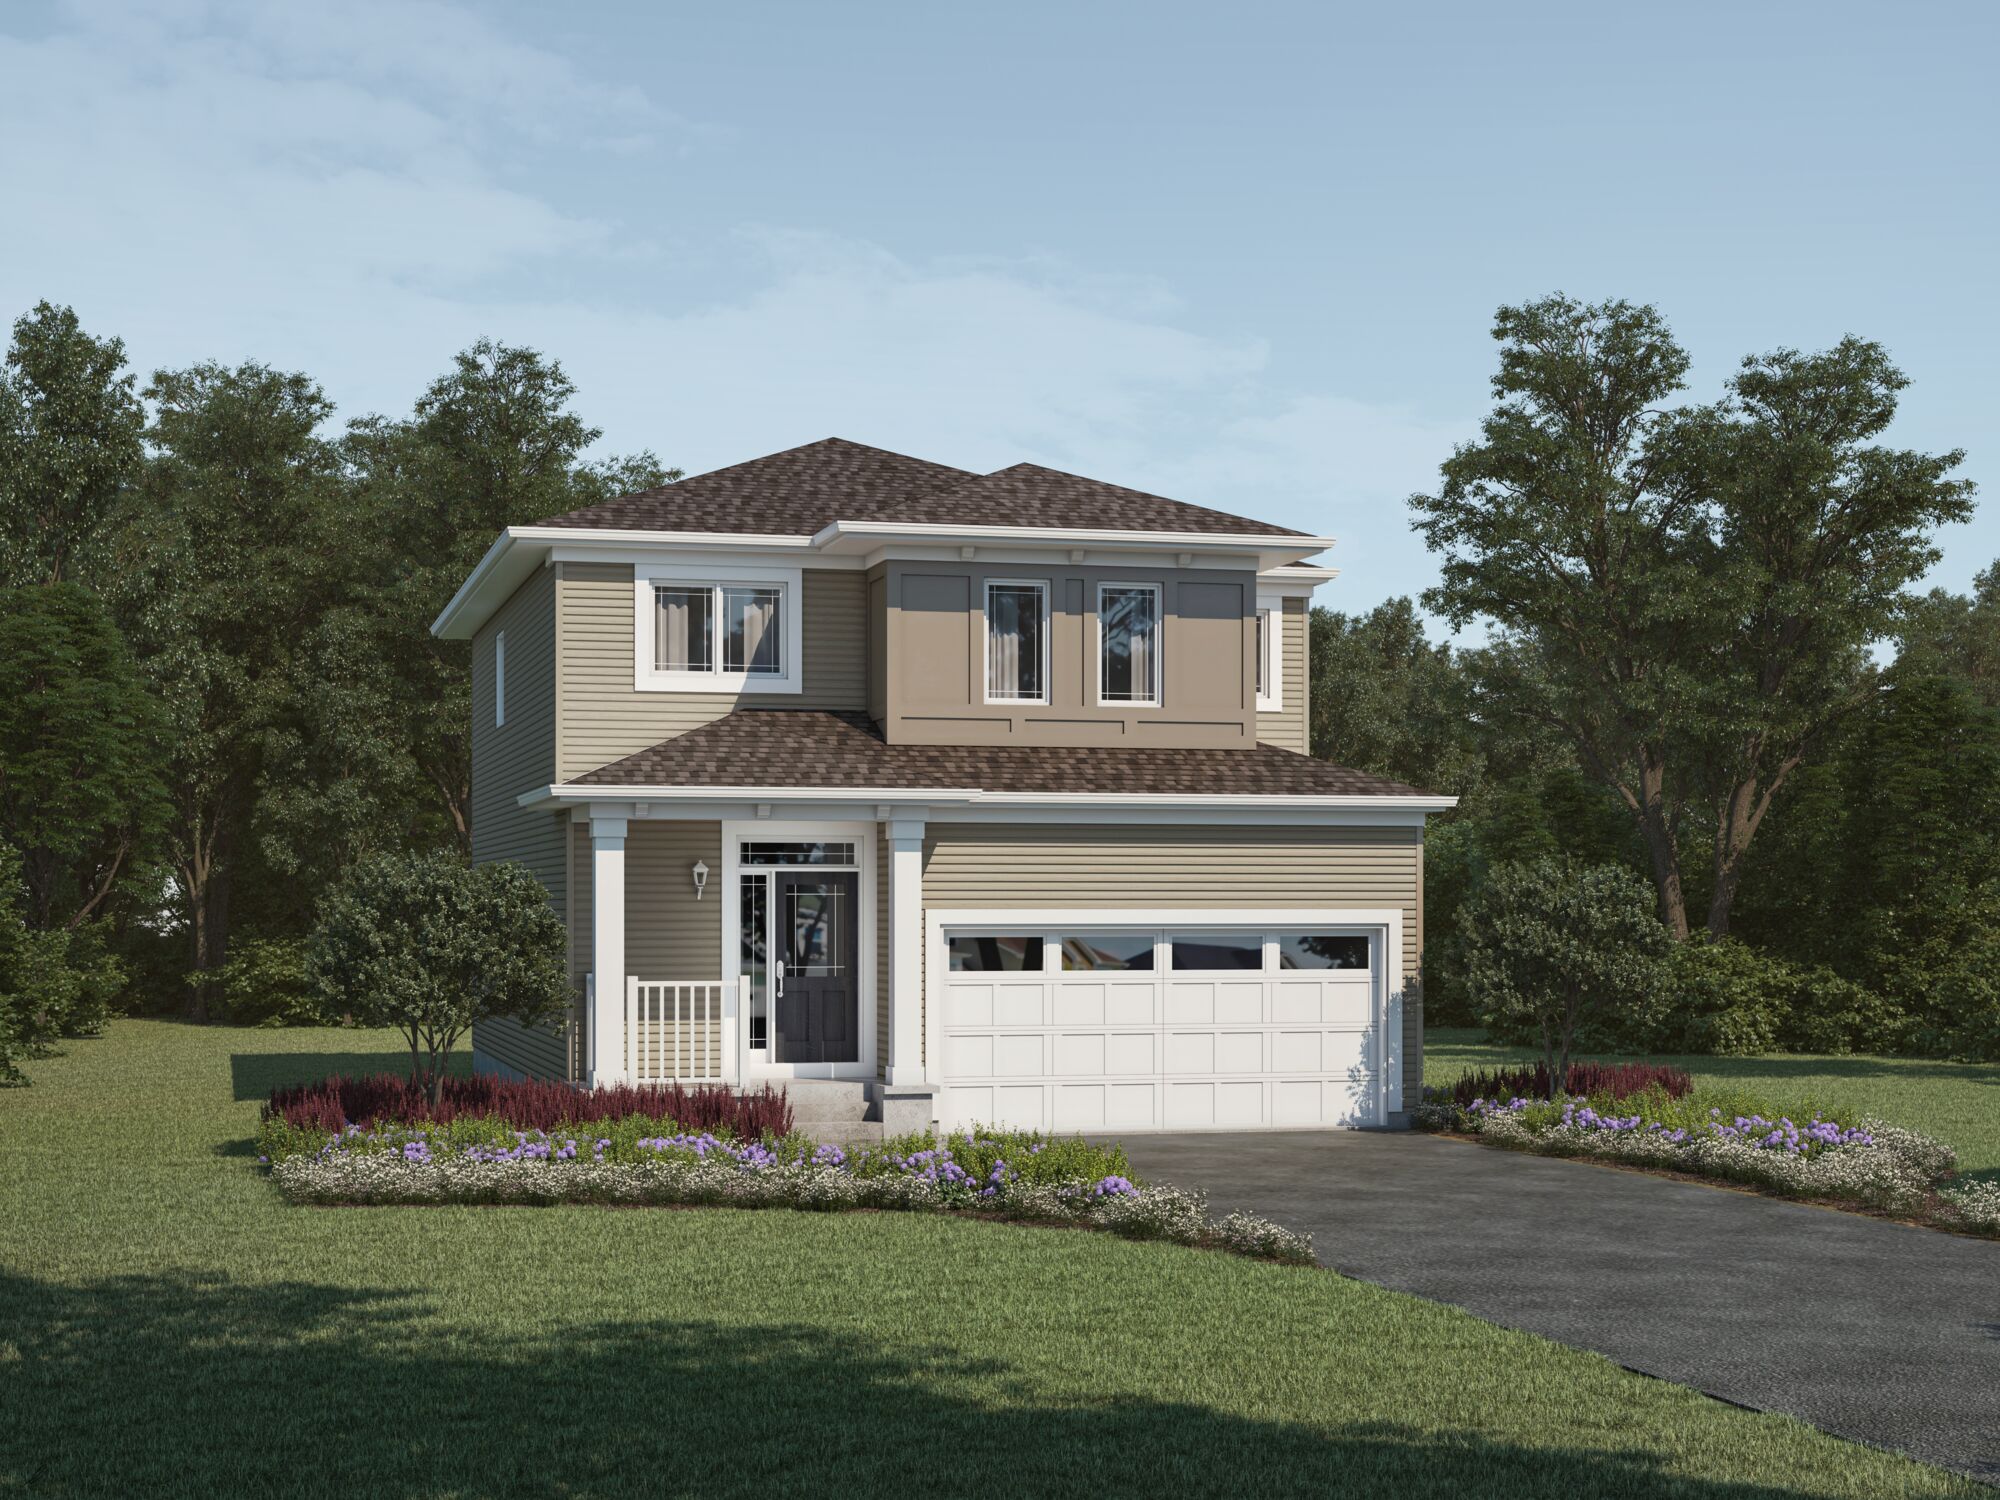 Rendering of the Prairie elevation for the Fairview Model